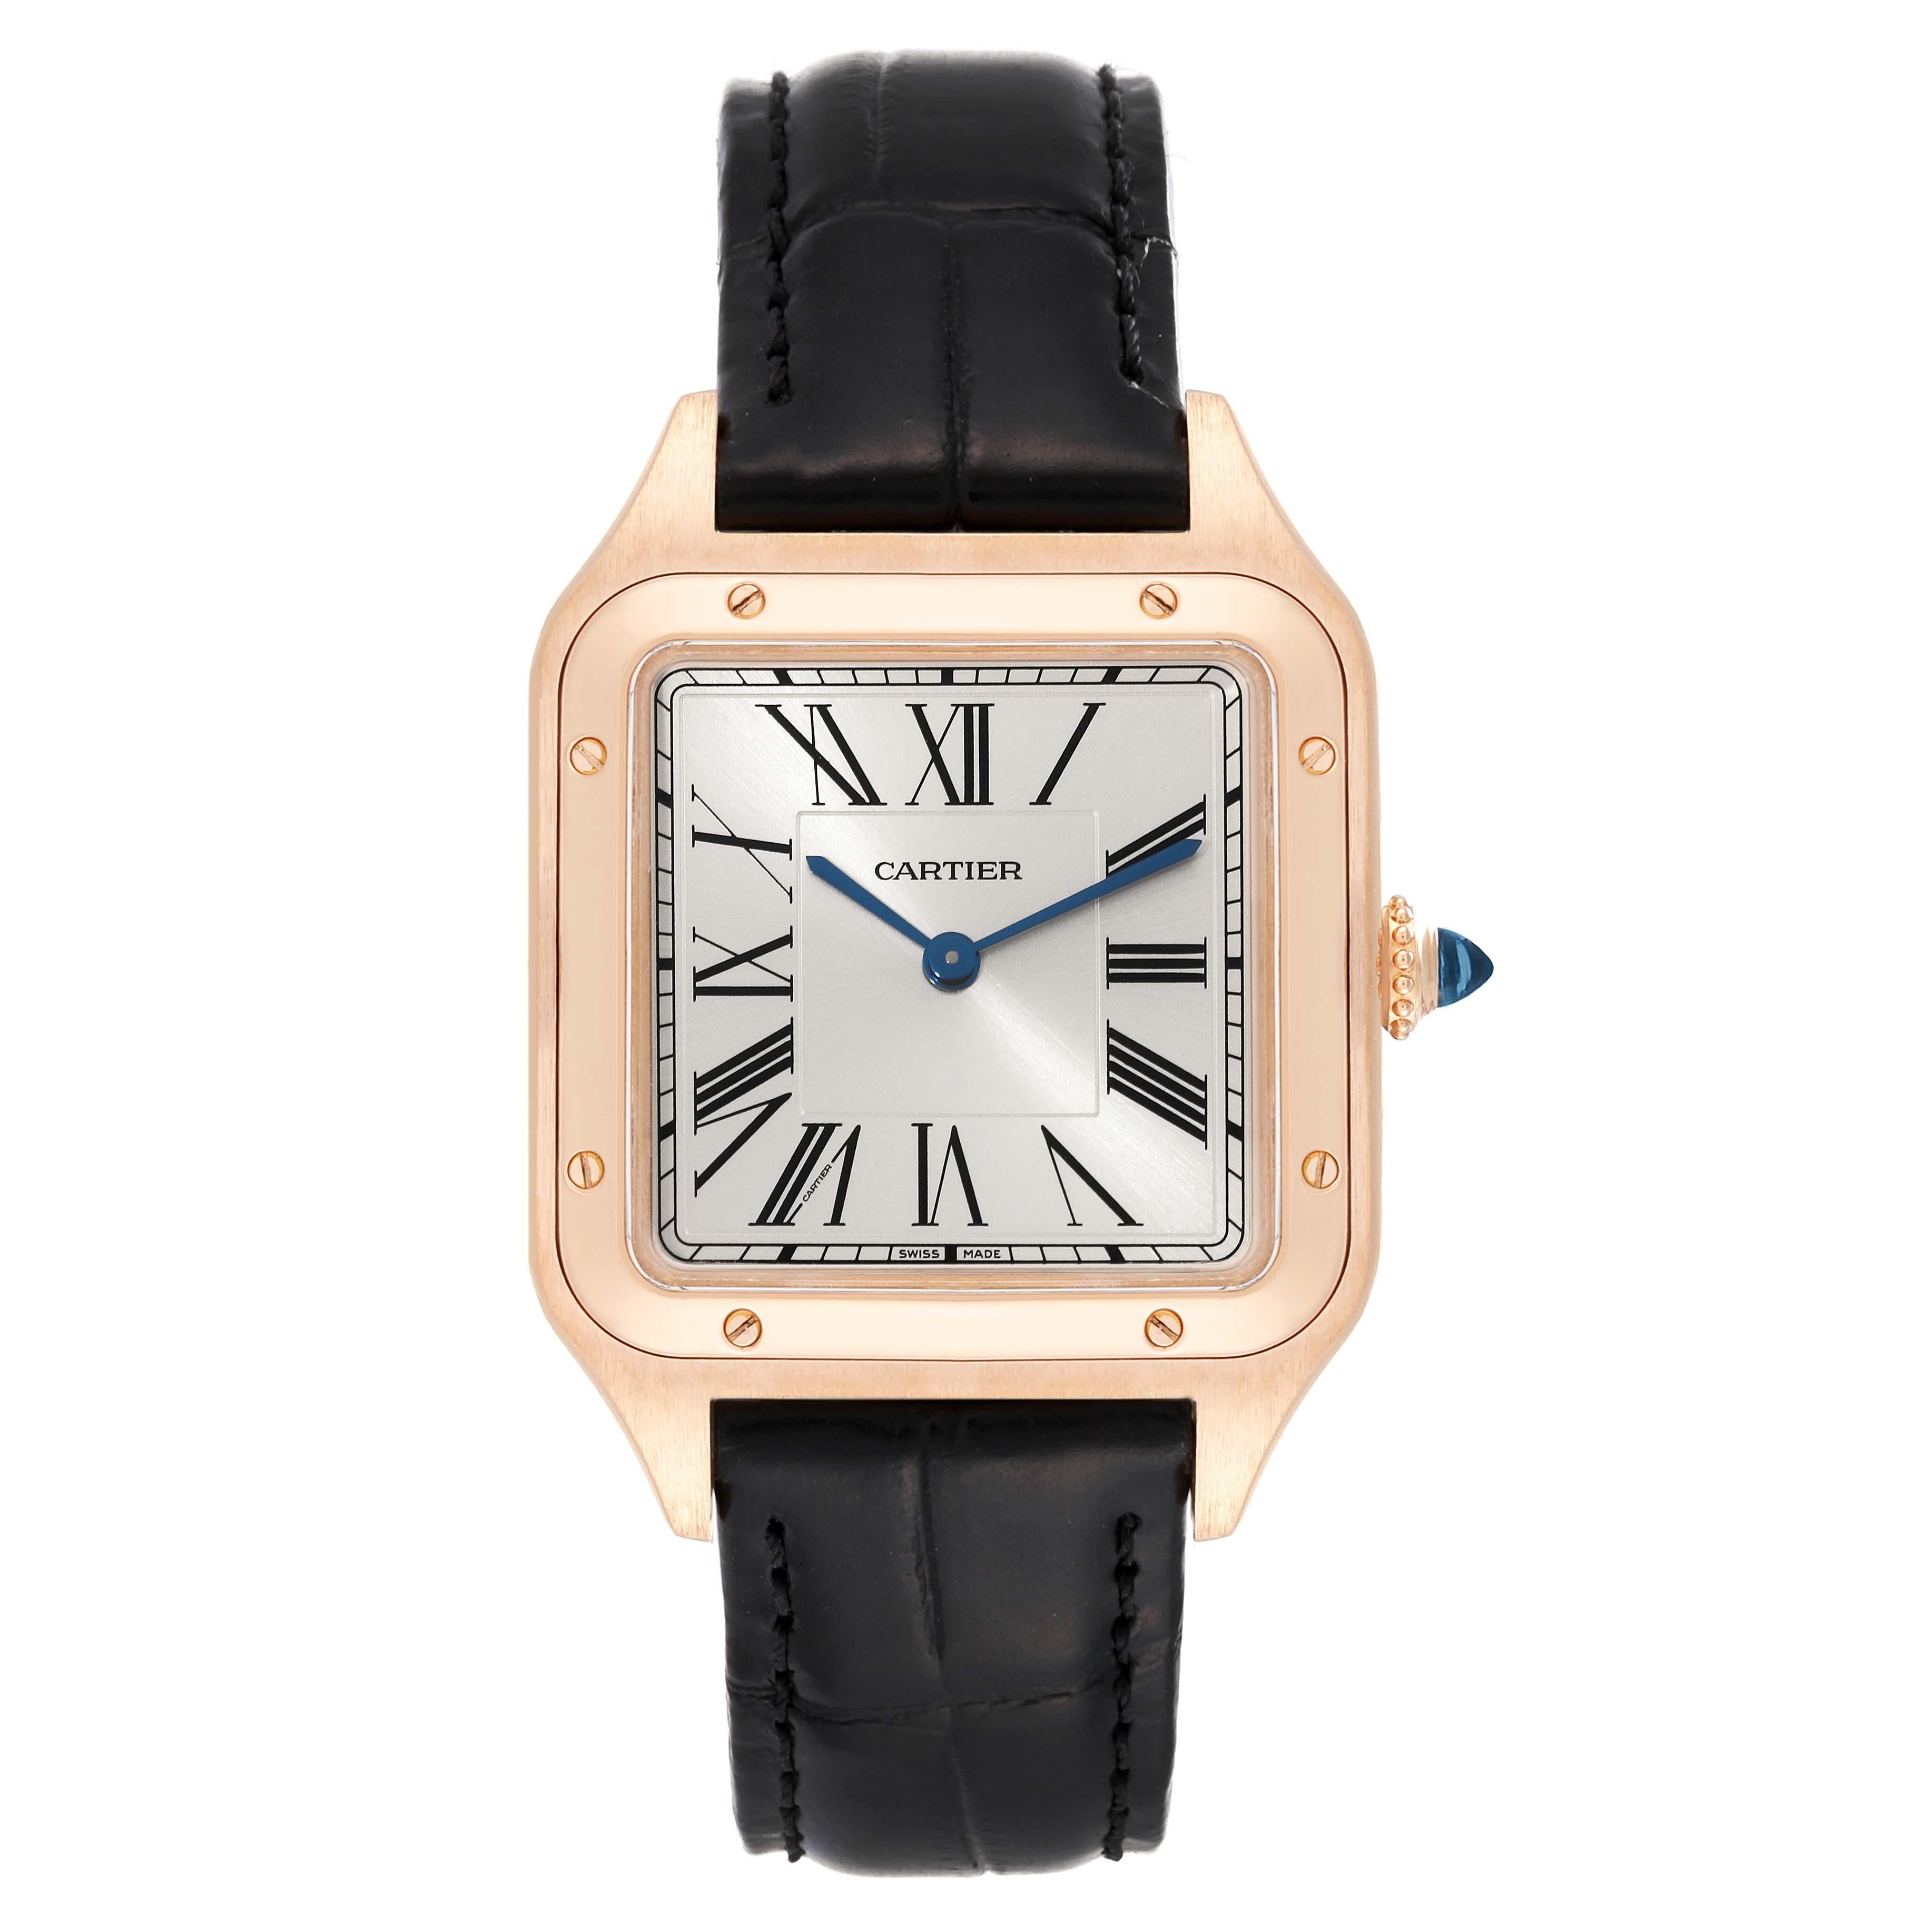 Cartier Santos Dumont Large Rose Gold Silver Dial Mens Watch WGSA0021 Papers. Quartz movement. 18k rose gold case 43.5 mm x 31.4 mm. Case thickness 7.3 mm. Circular grained crown set with blue sapphire cabochon. 18k rose gold bezel punctuated with 8